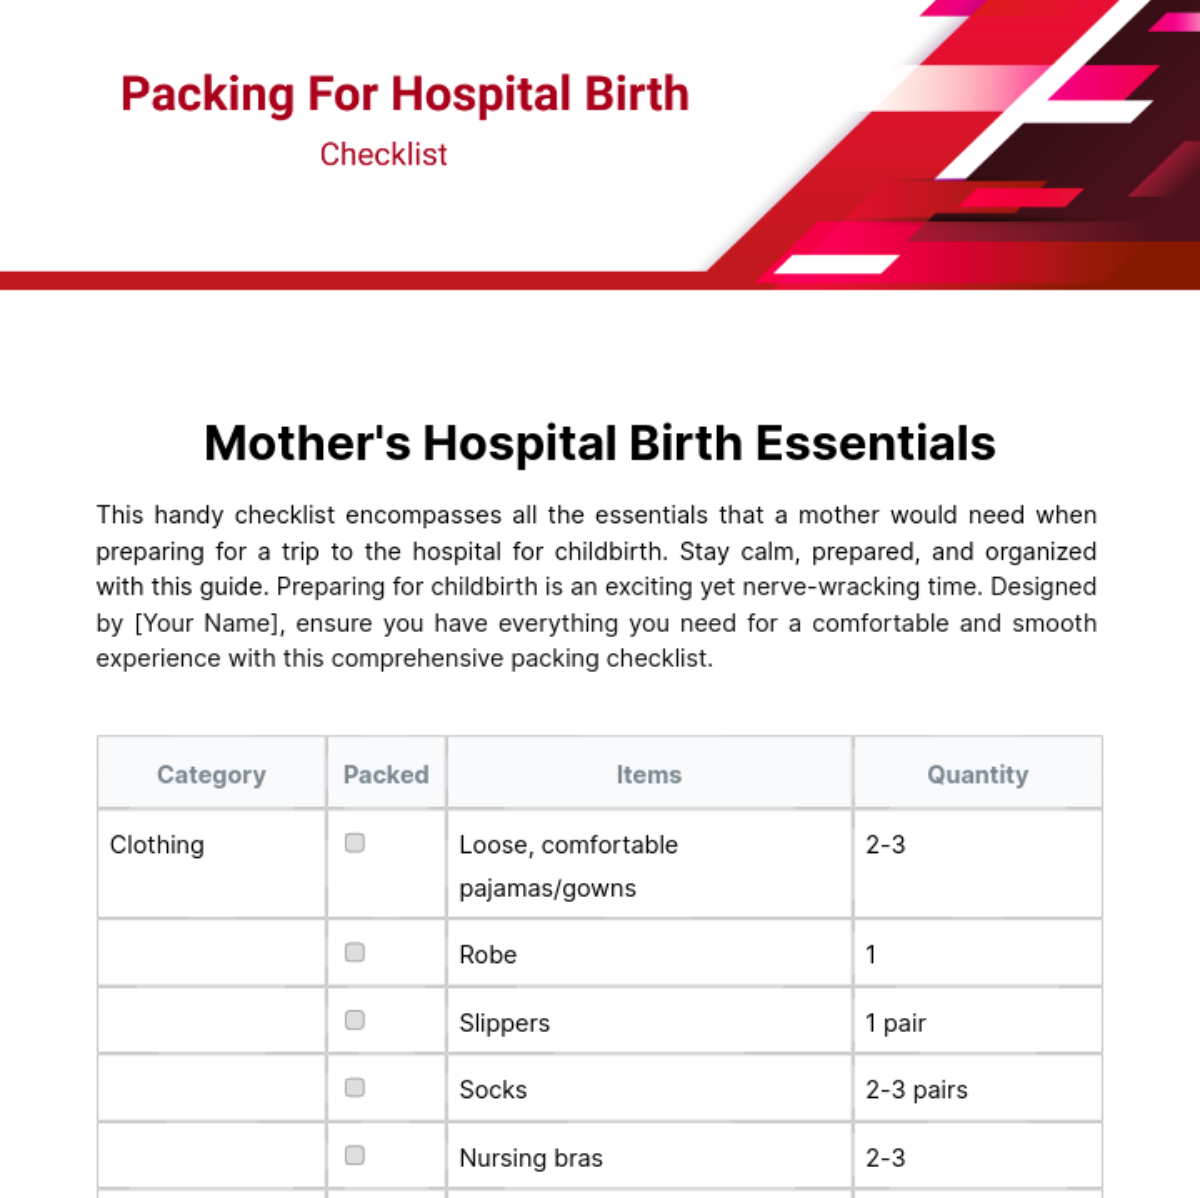 Packing For Hospital Birth Checklist Template